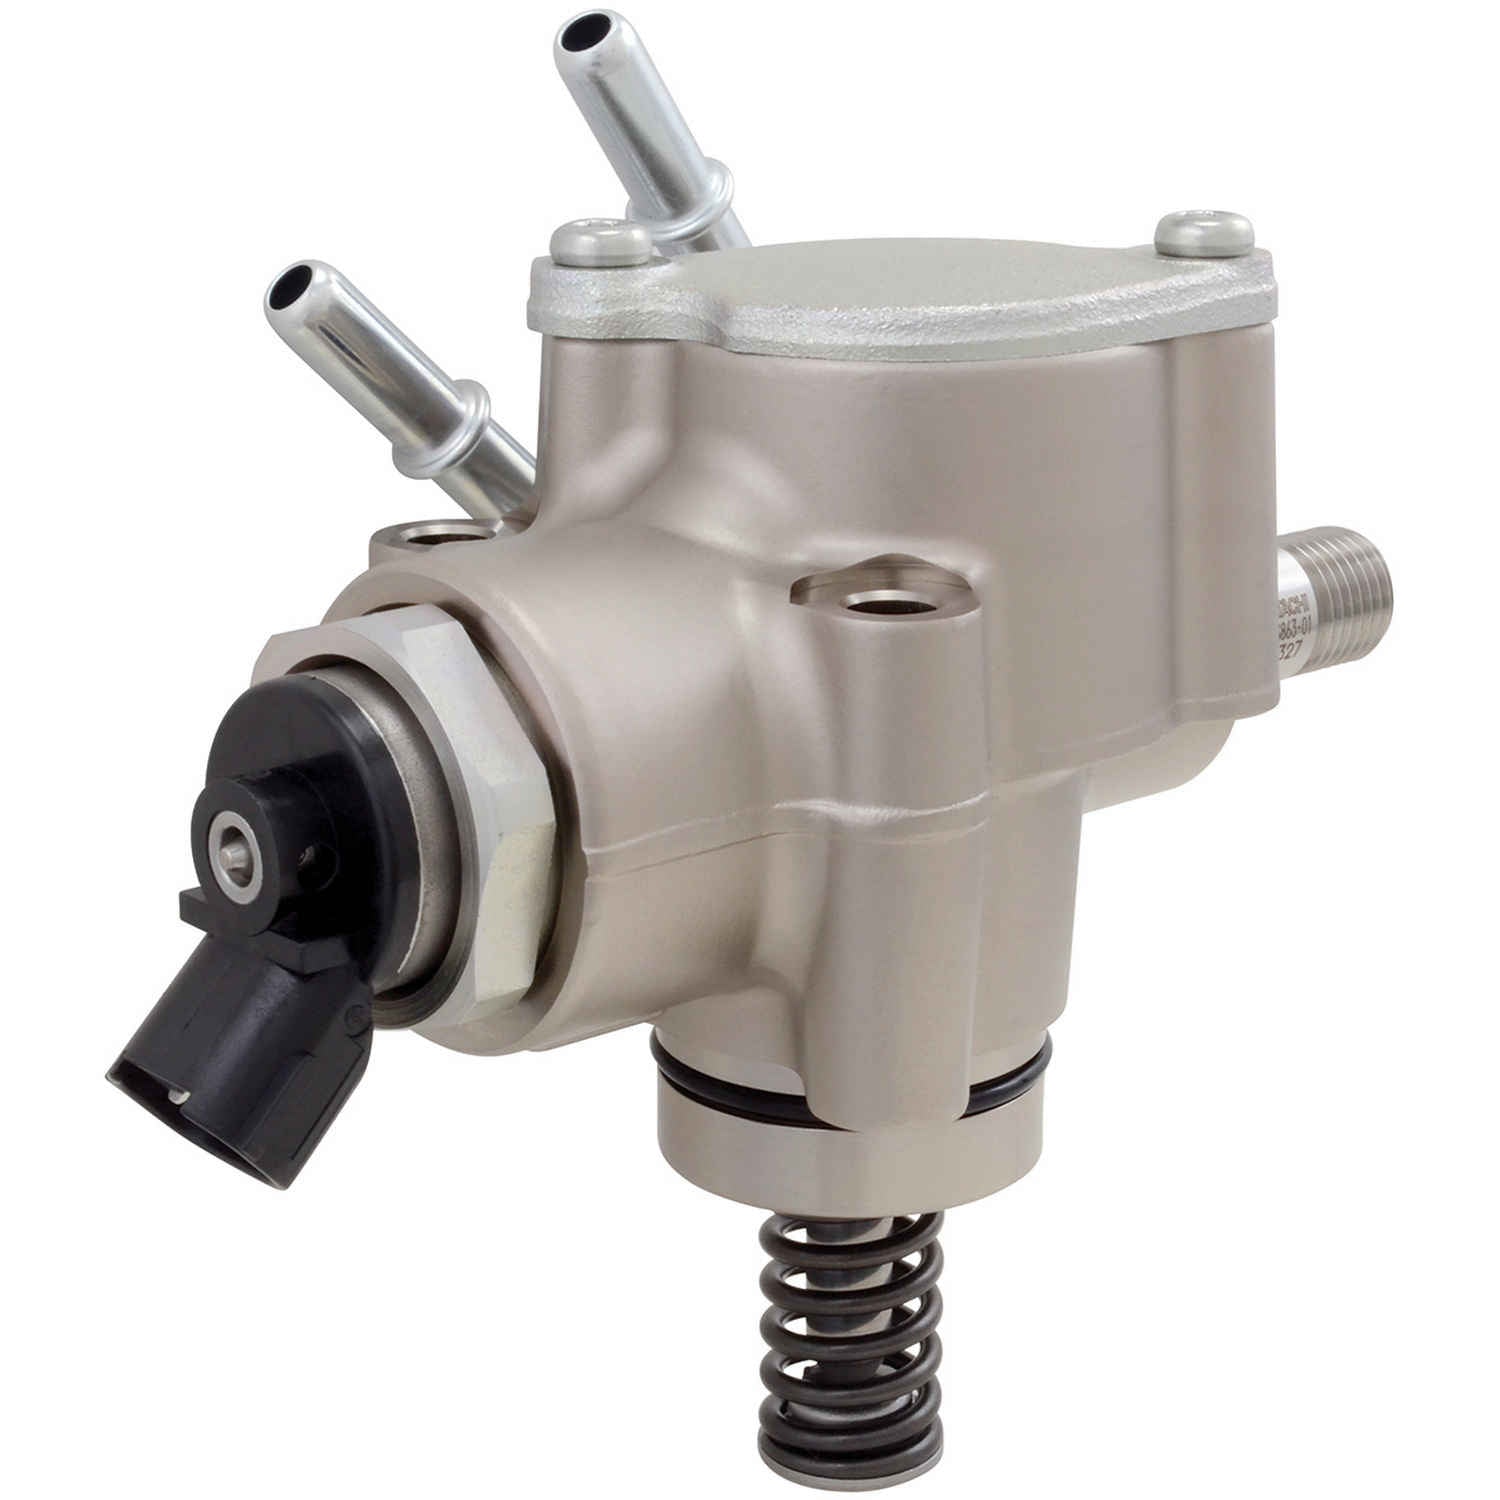 Left View of Direct Injection High Pressure Fuel Pump HITACHI HPP0027